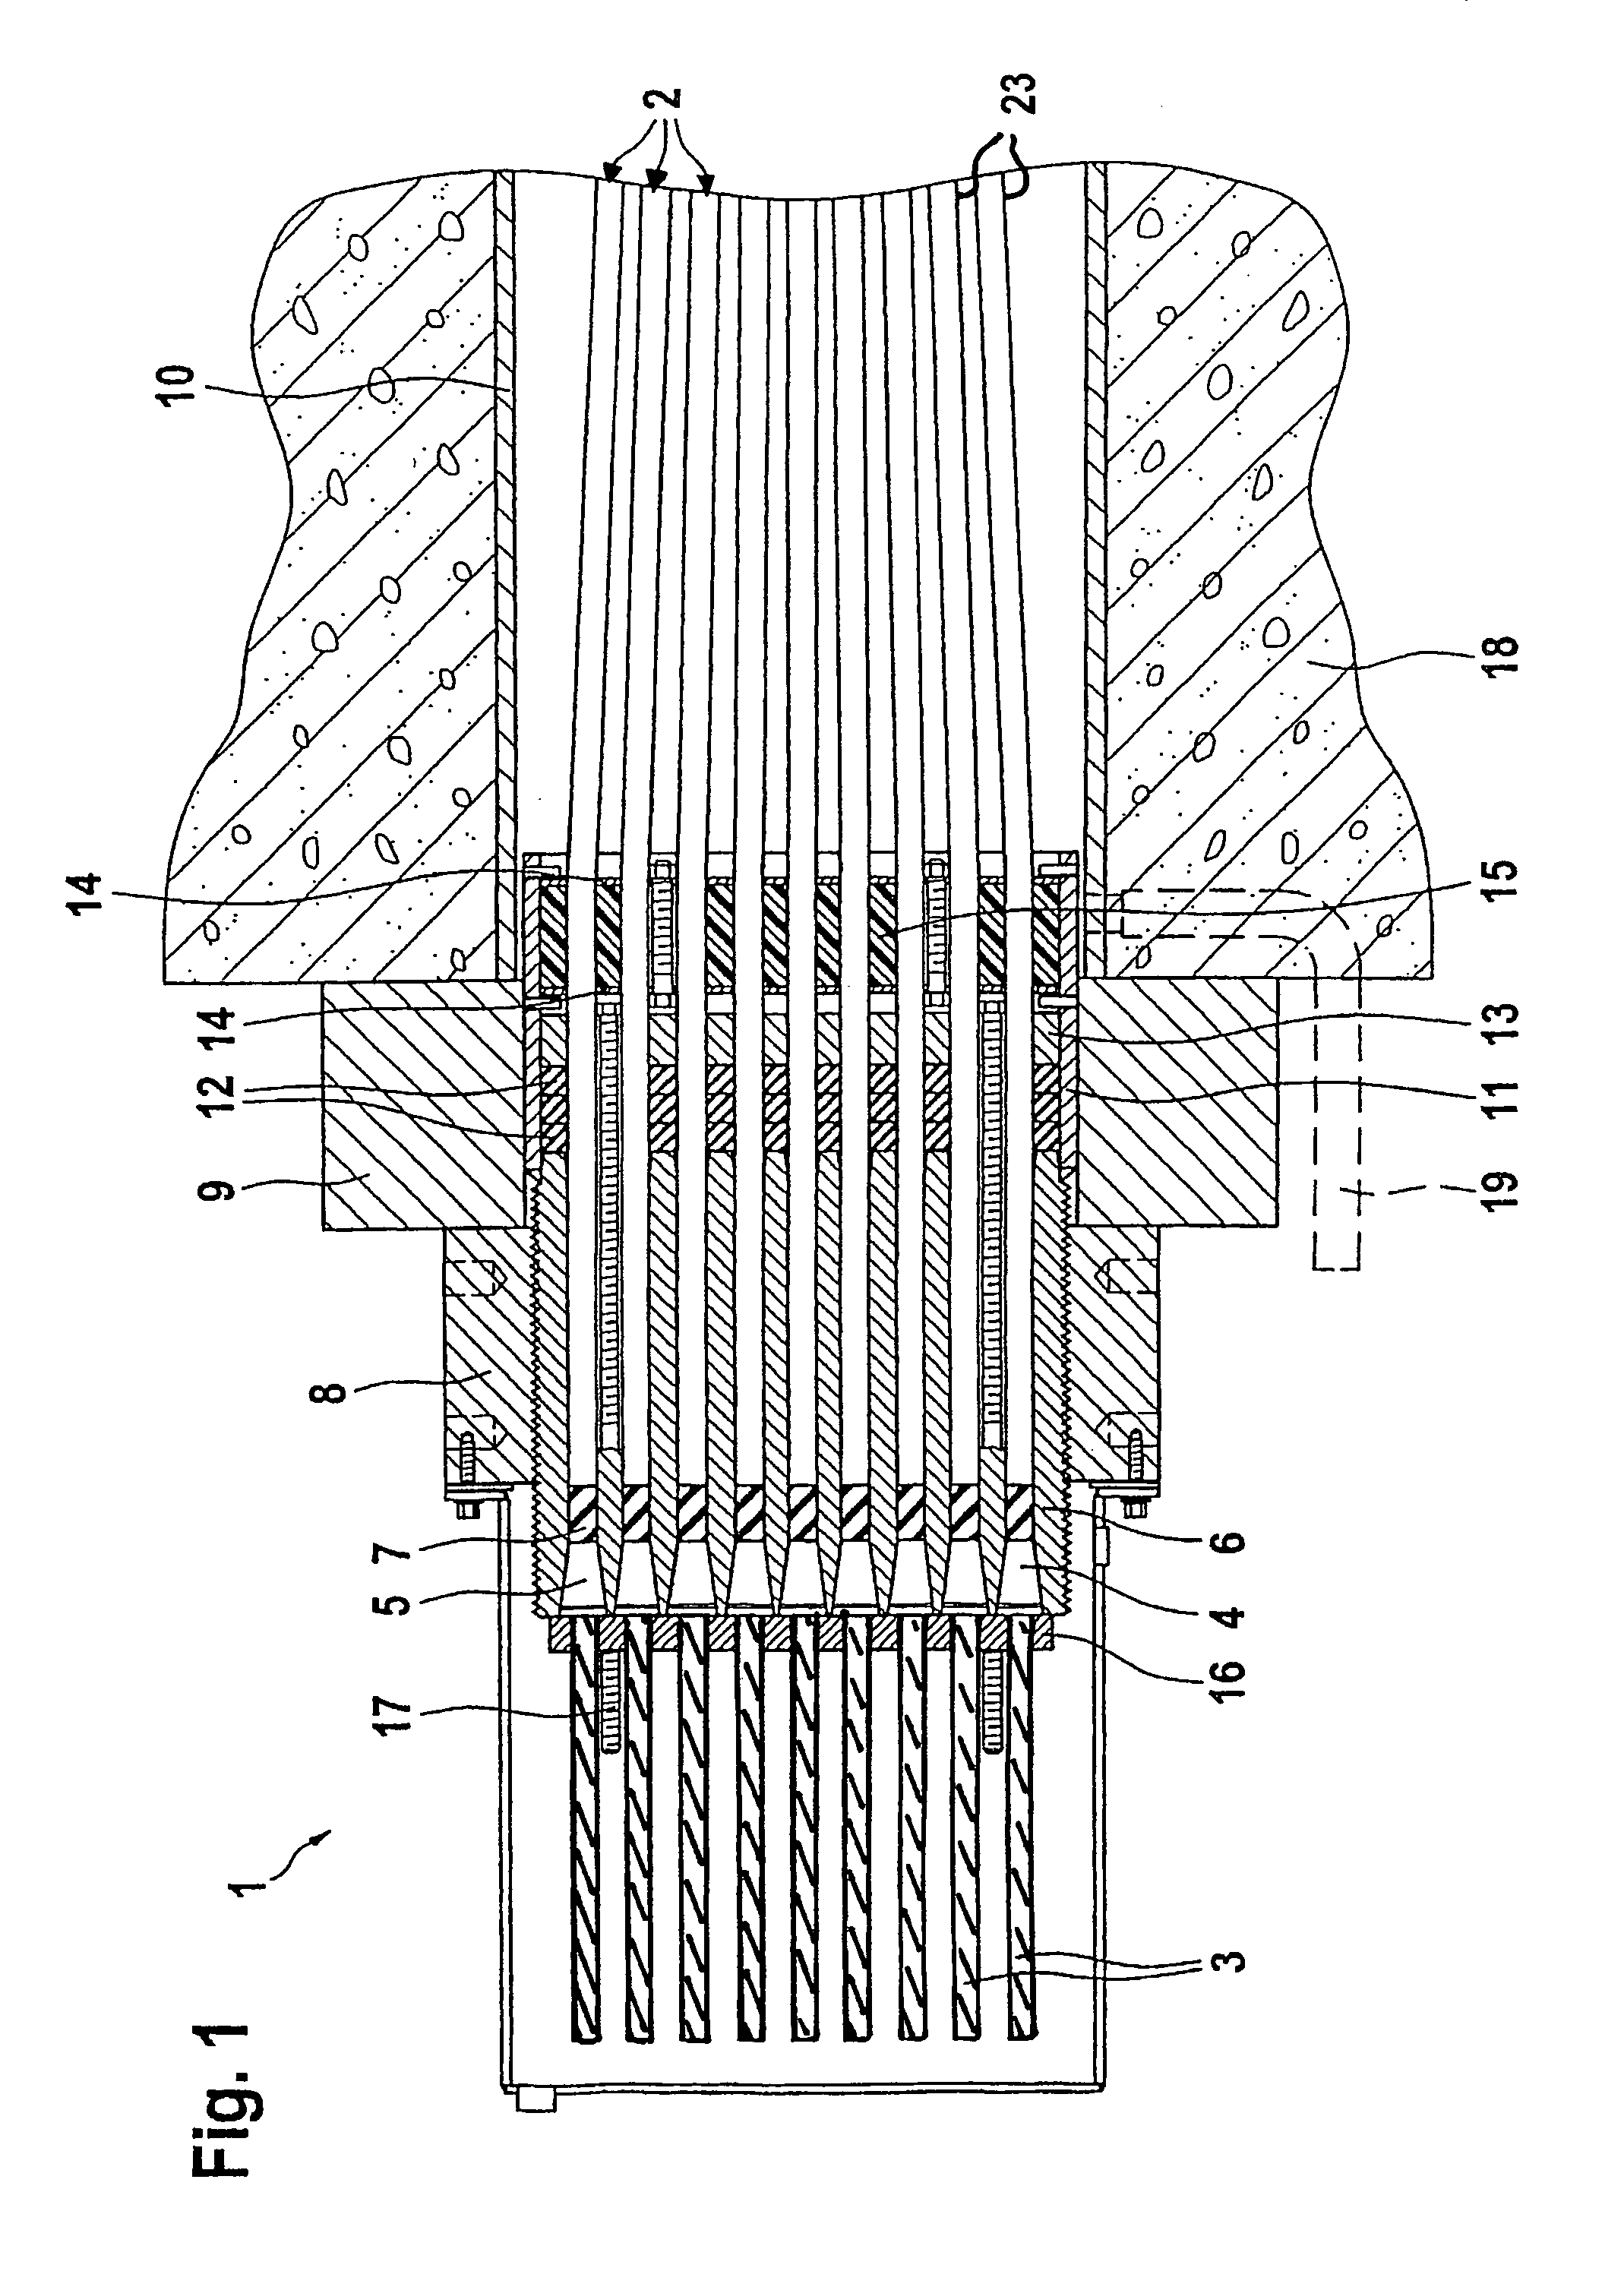 Anchoring device for a corrosion-resistant tension member, particularly an inclined cable for a cable-stayed bridge